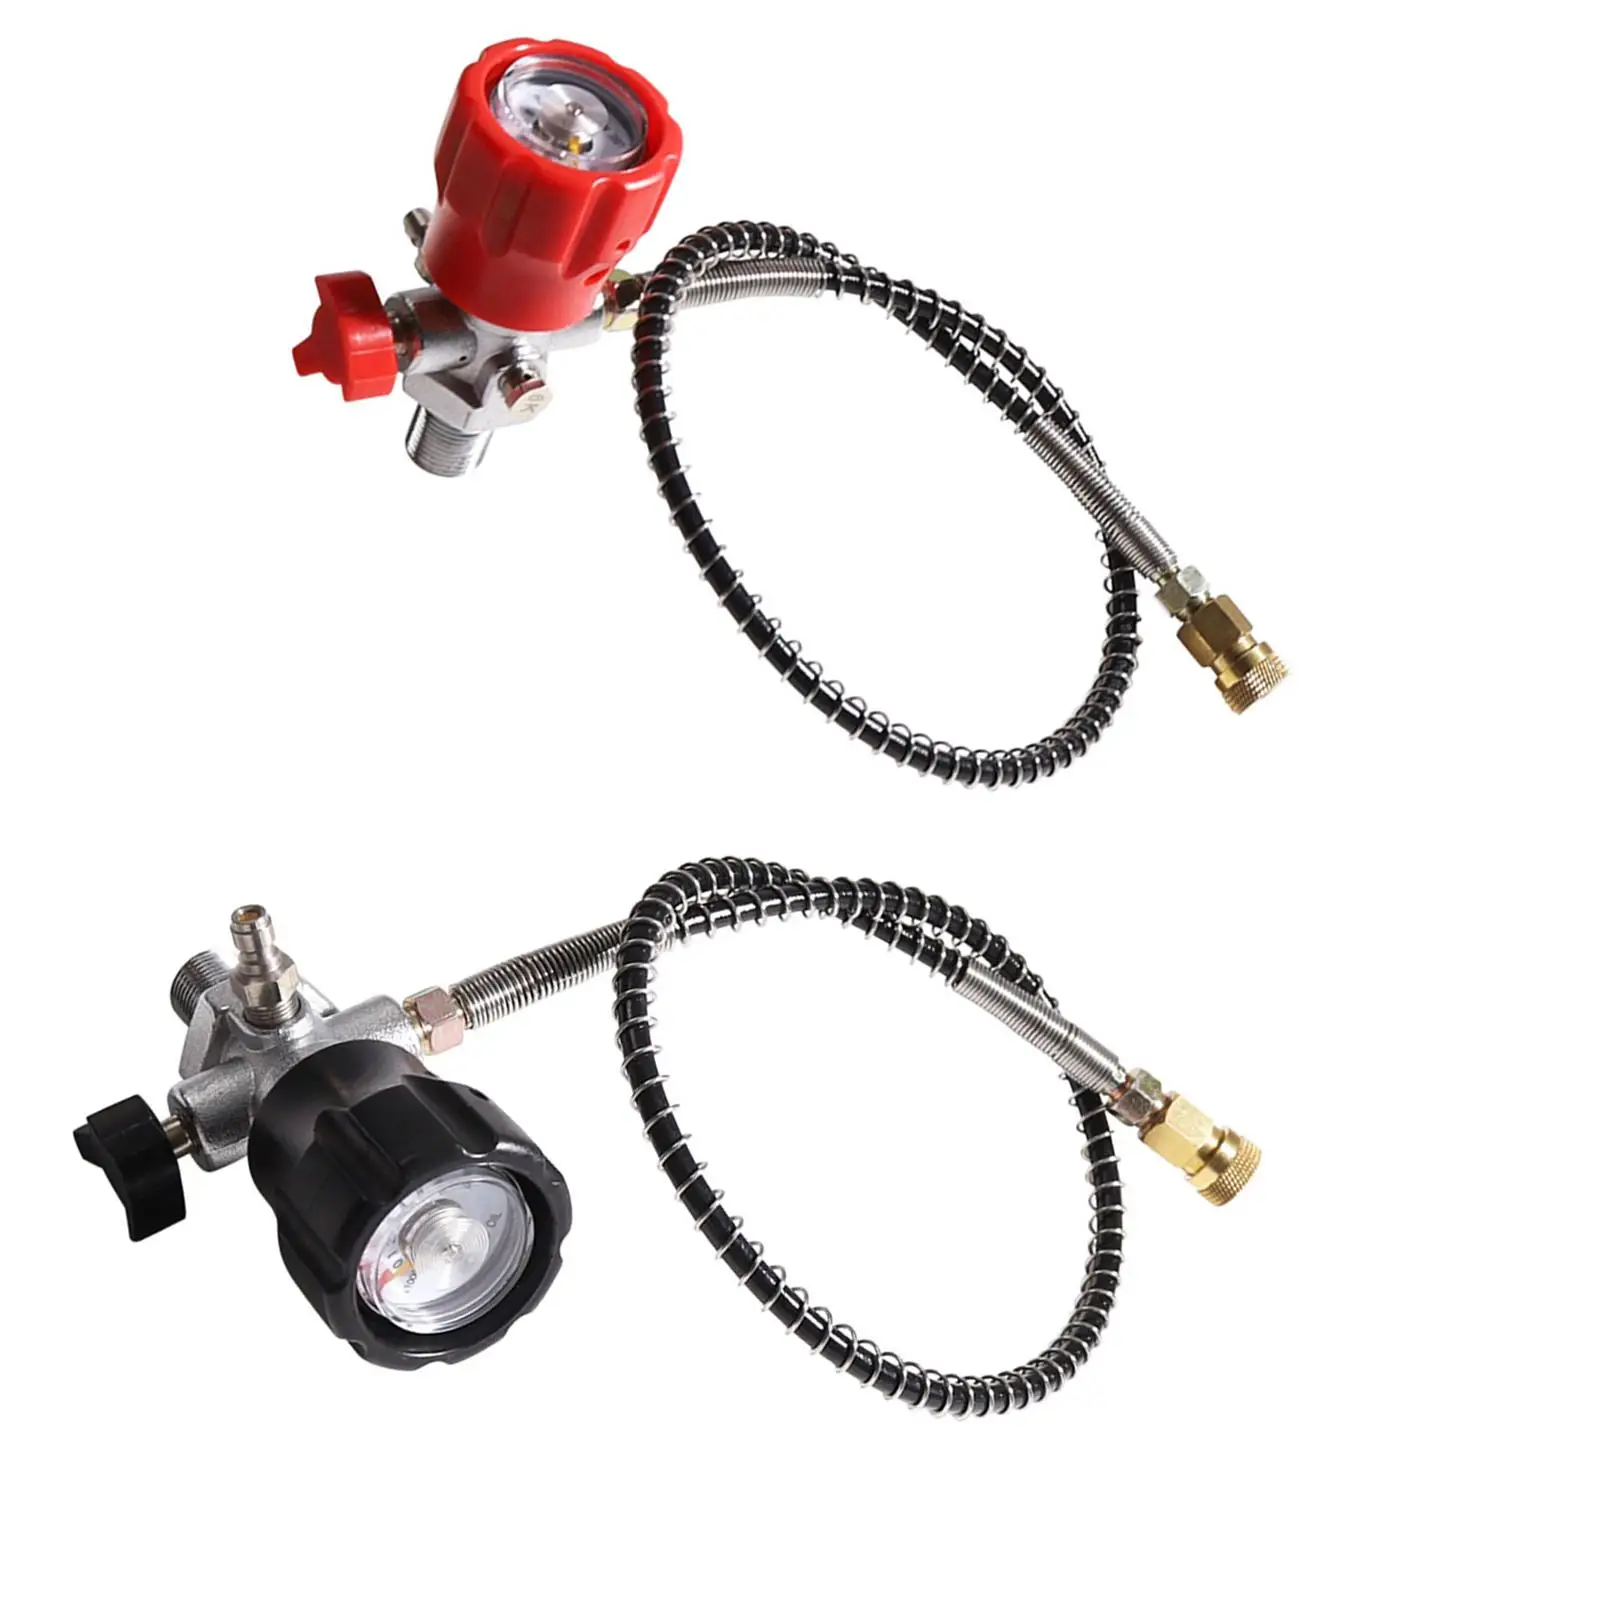 Fill Station Charging Adapter Hose Accessory Part 24inch Charging Hose Connector Tank Refill Adapter for Scuba Tank